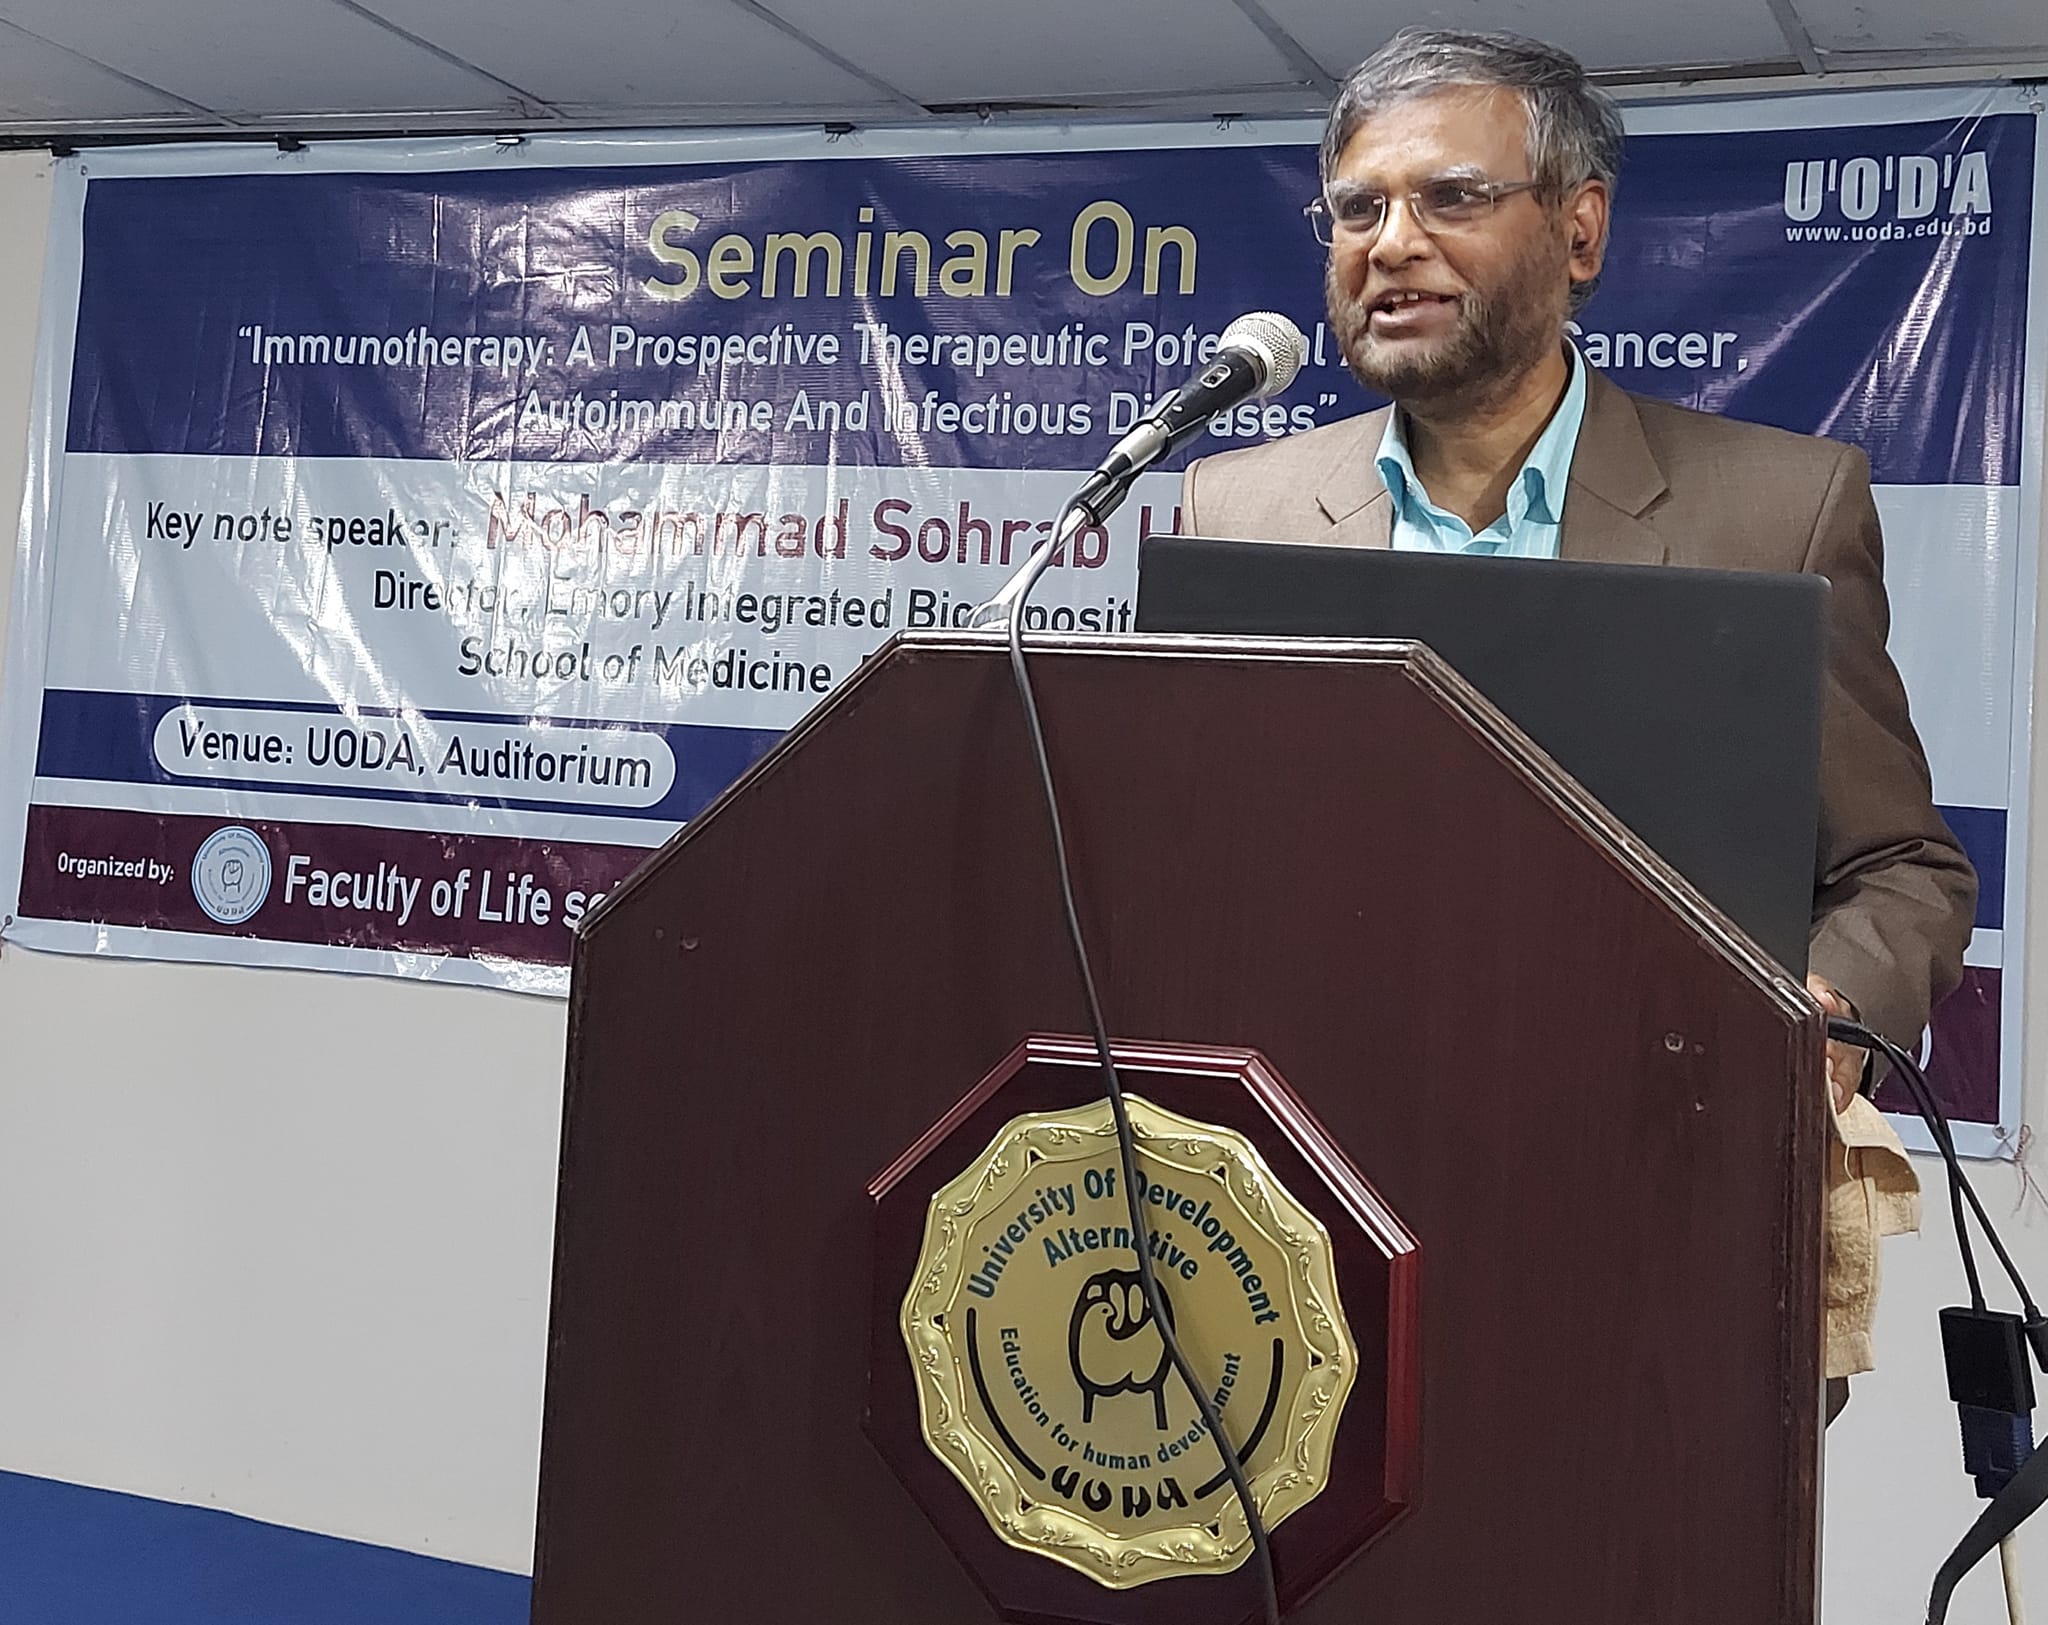 Seminar on Immunotherapy: a Prospective Therapeutic Potential Against Cancer